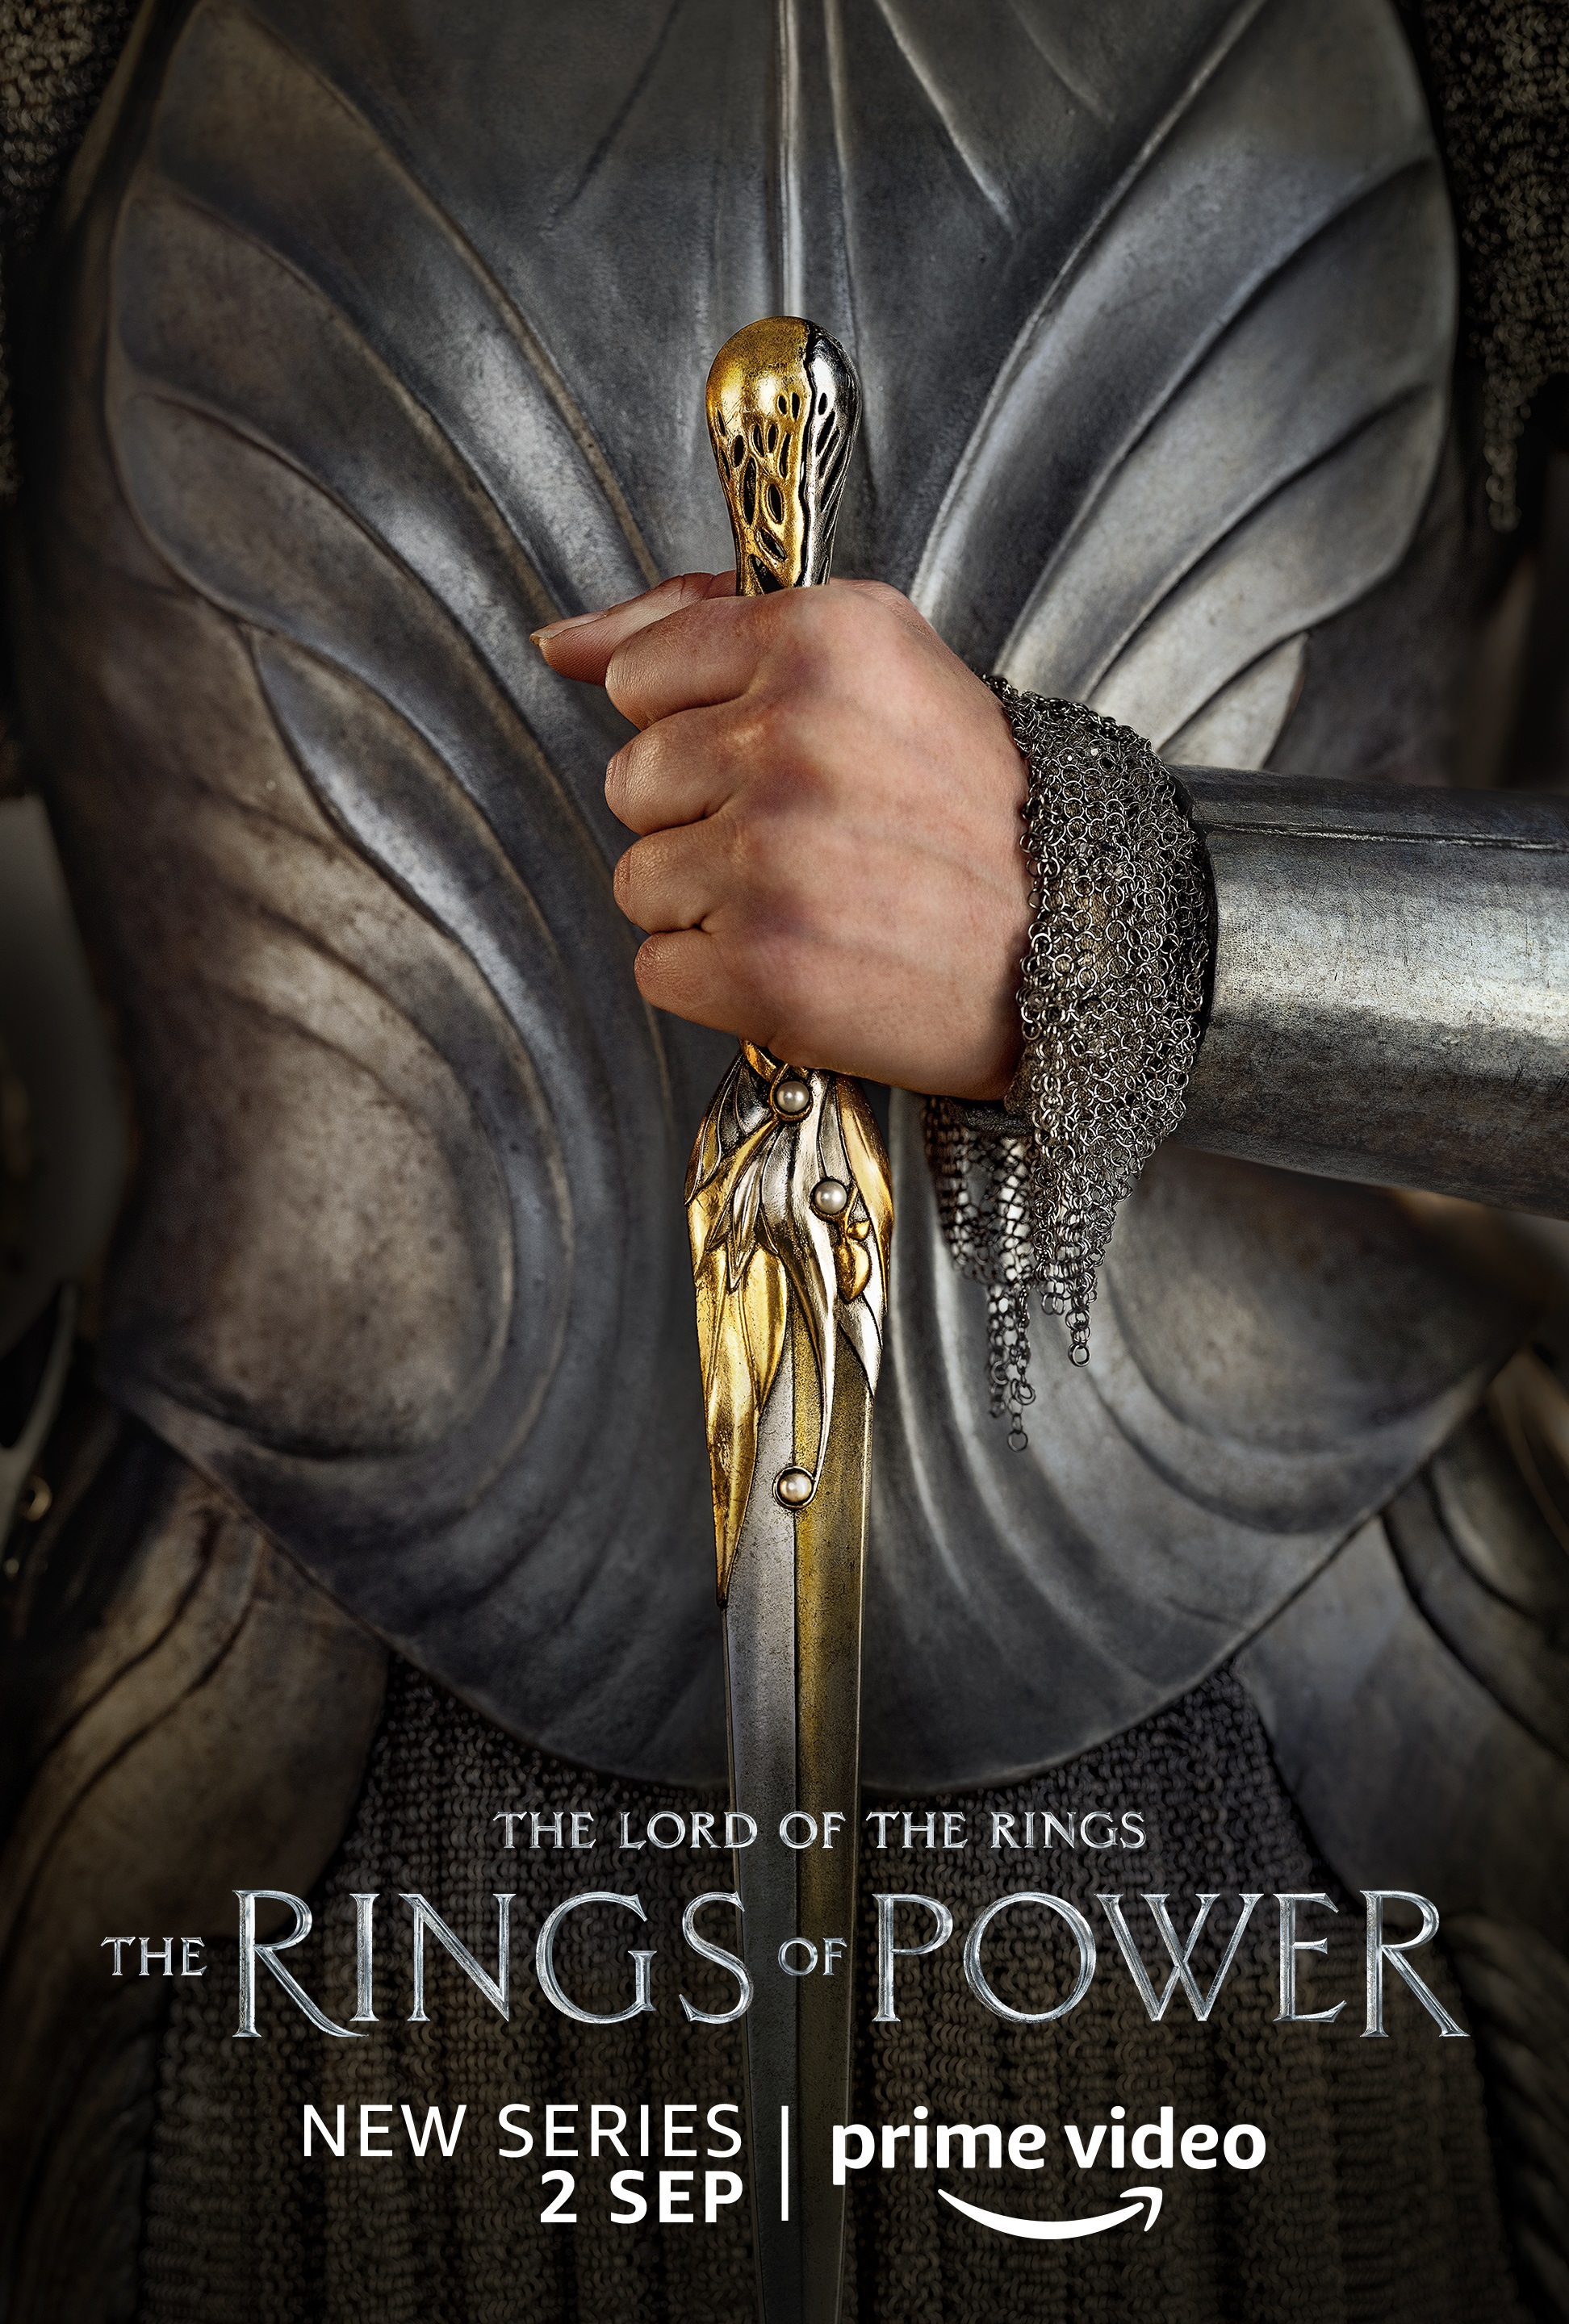 A human character poster for Lord of the Rings: The Rings of Power